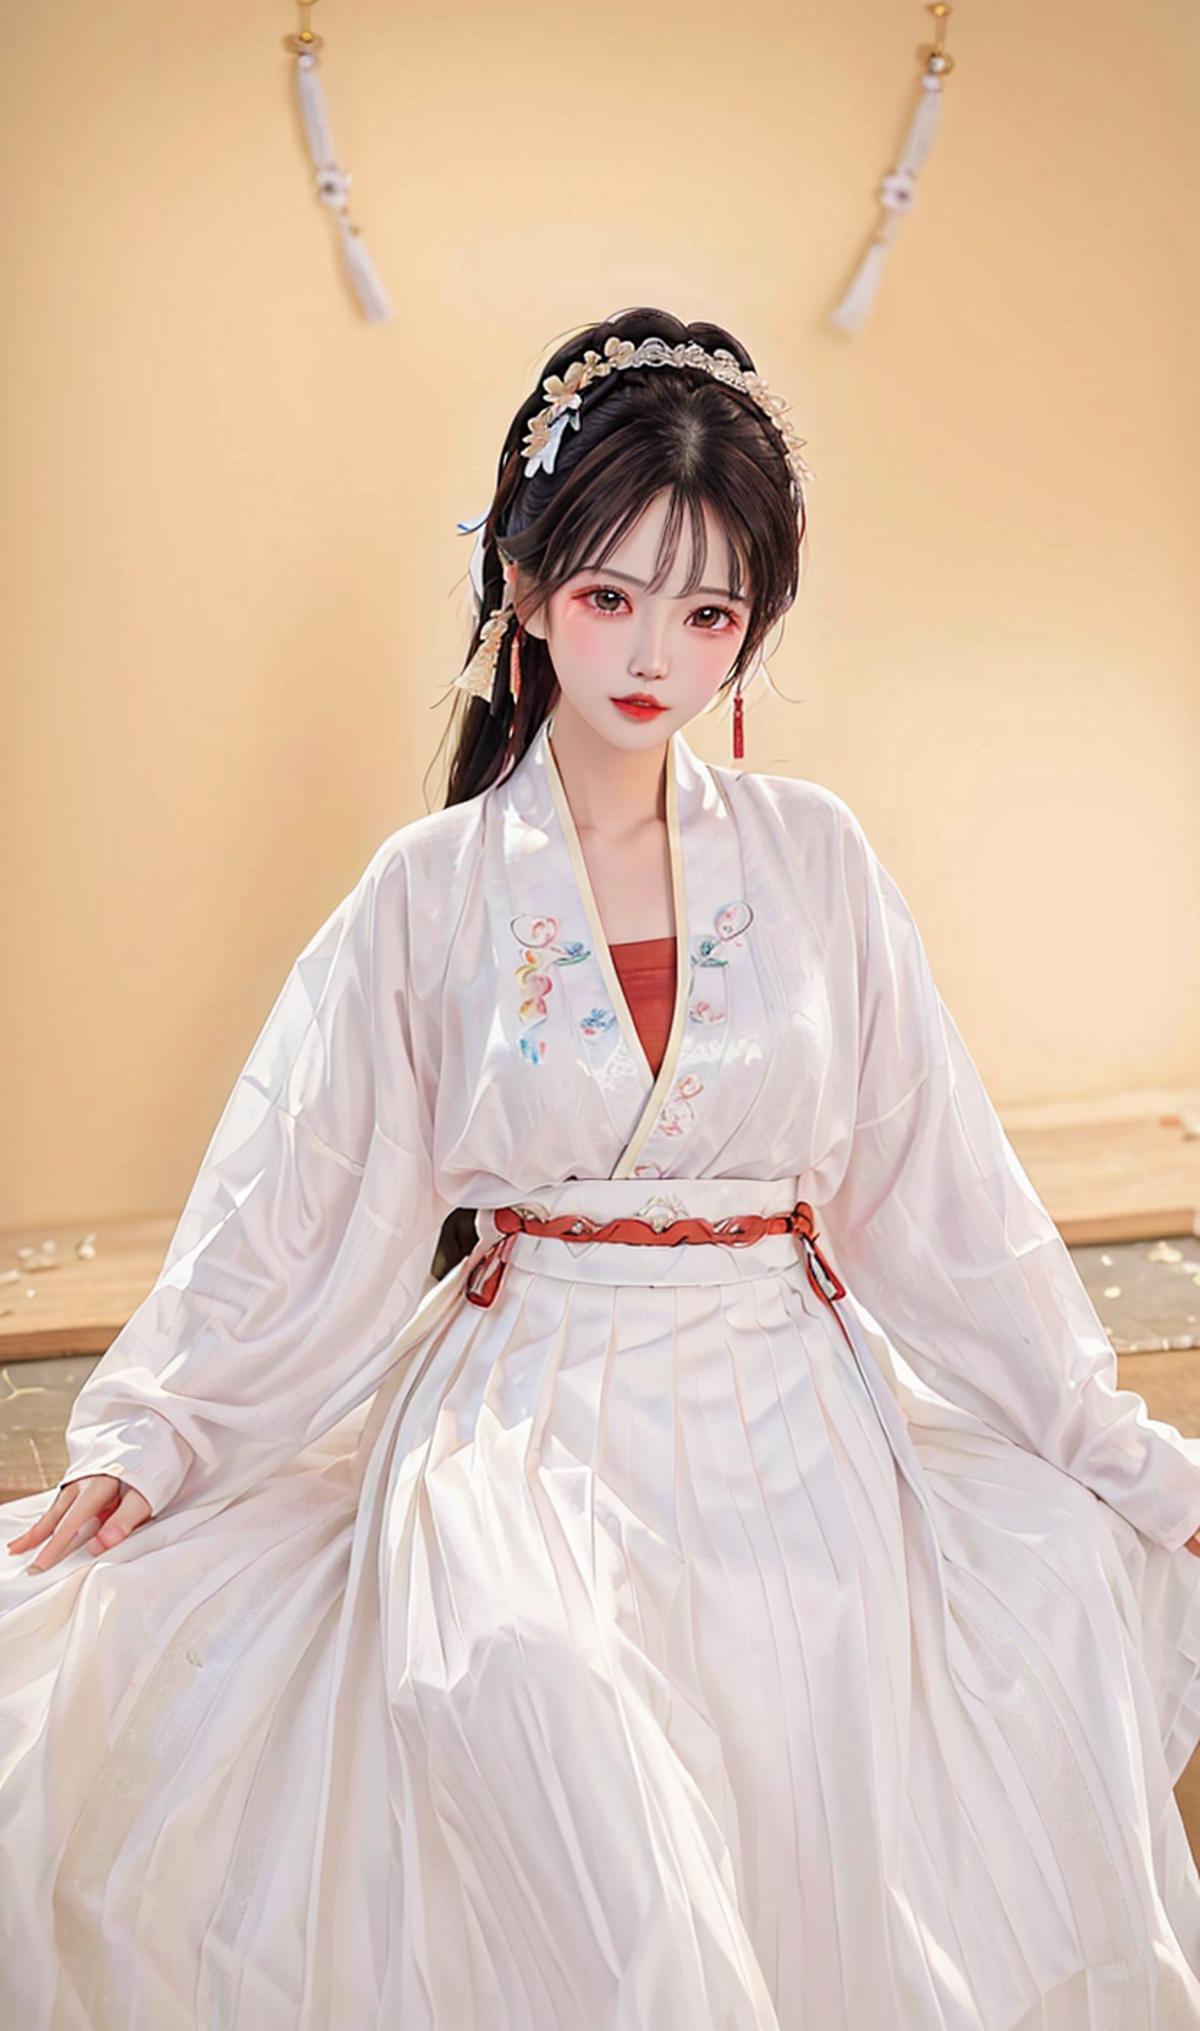 hanfu song 汉服宋风 image by charleshuang_of_3823